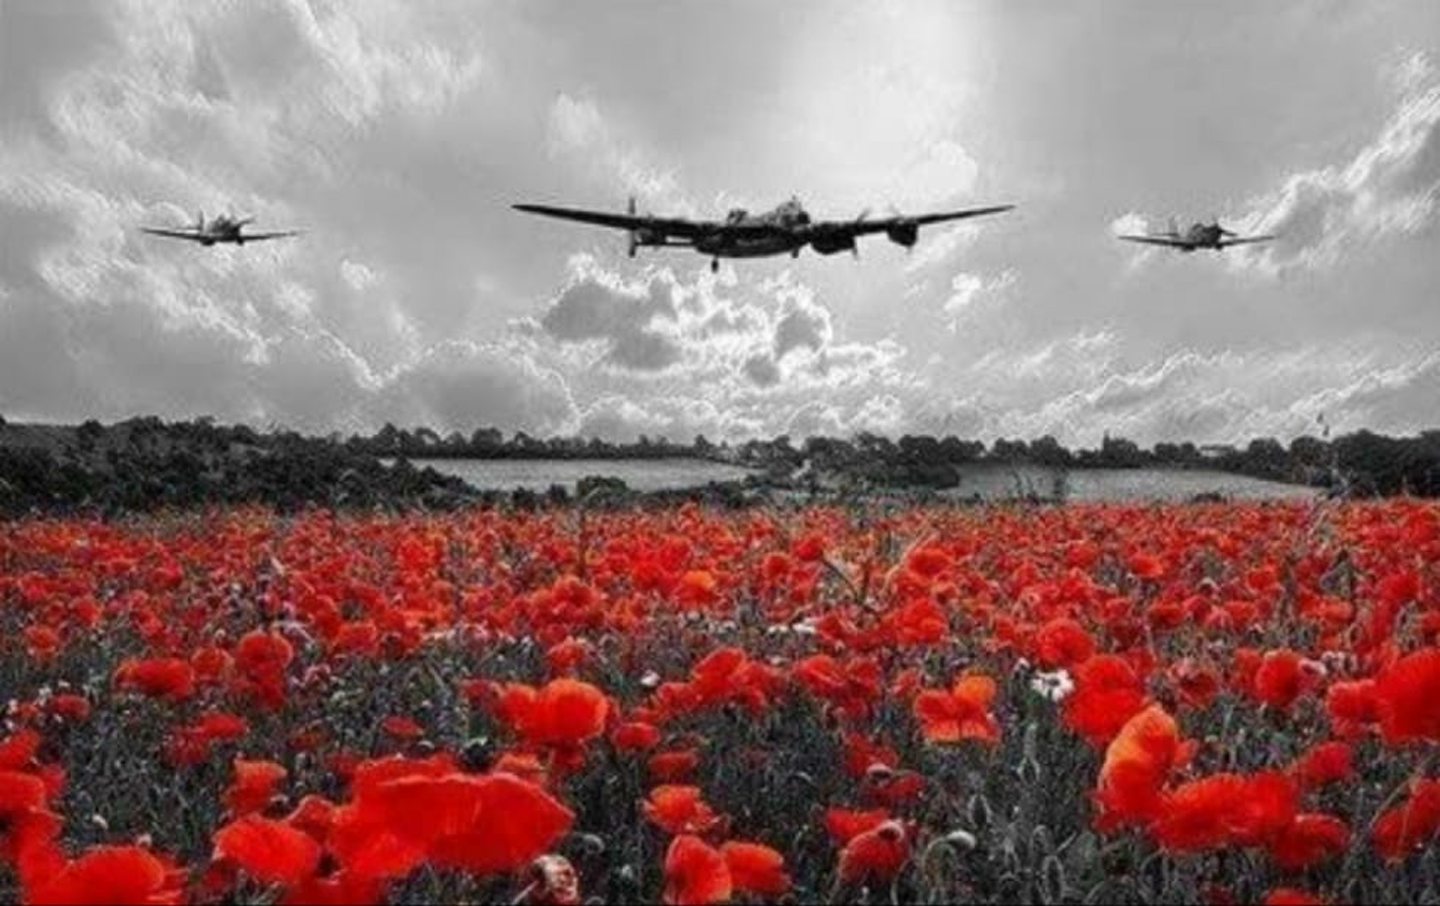 Planes flying over a field of red flowers.